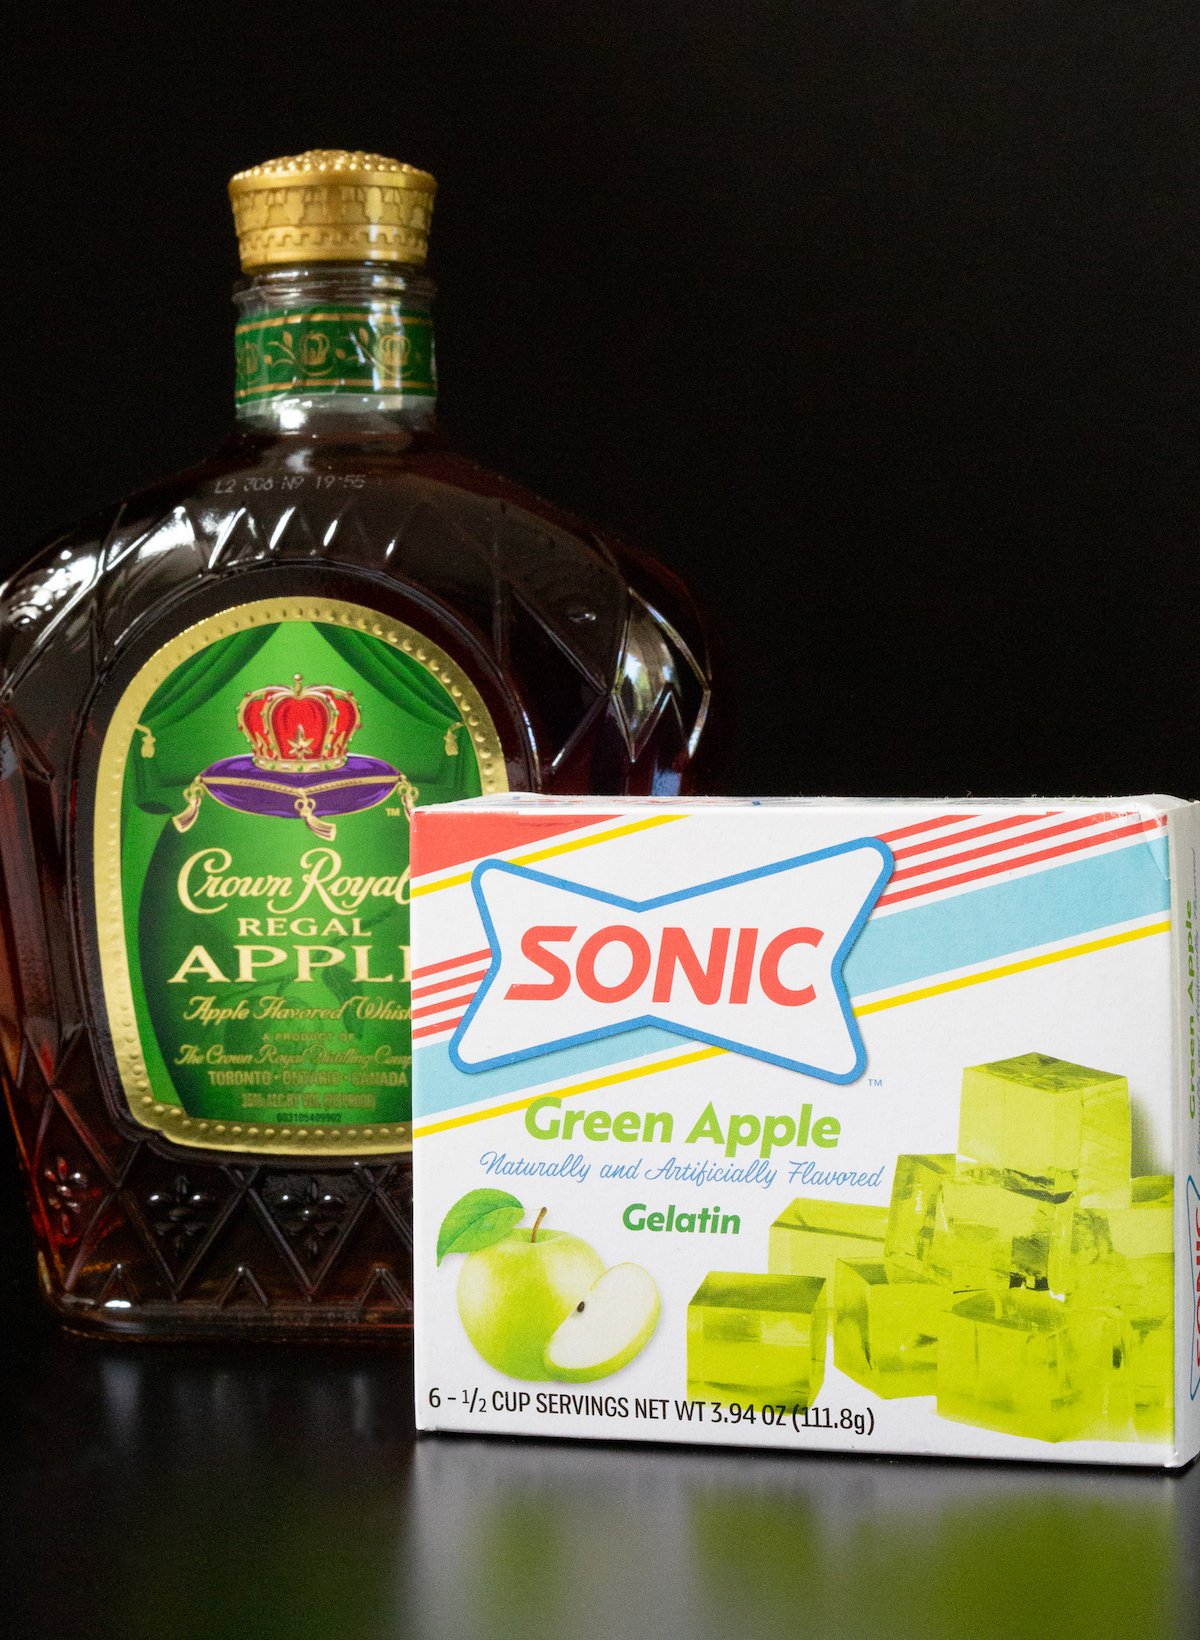 A bottle of Crown Apple whisky and a box of Sonic green apple gelatin on a black background.